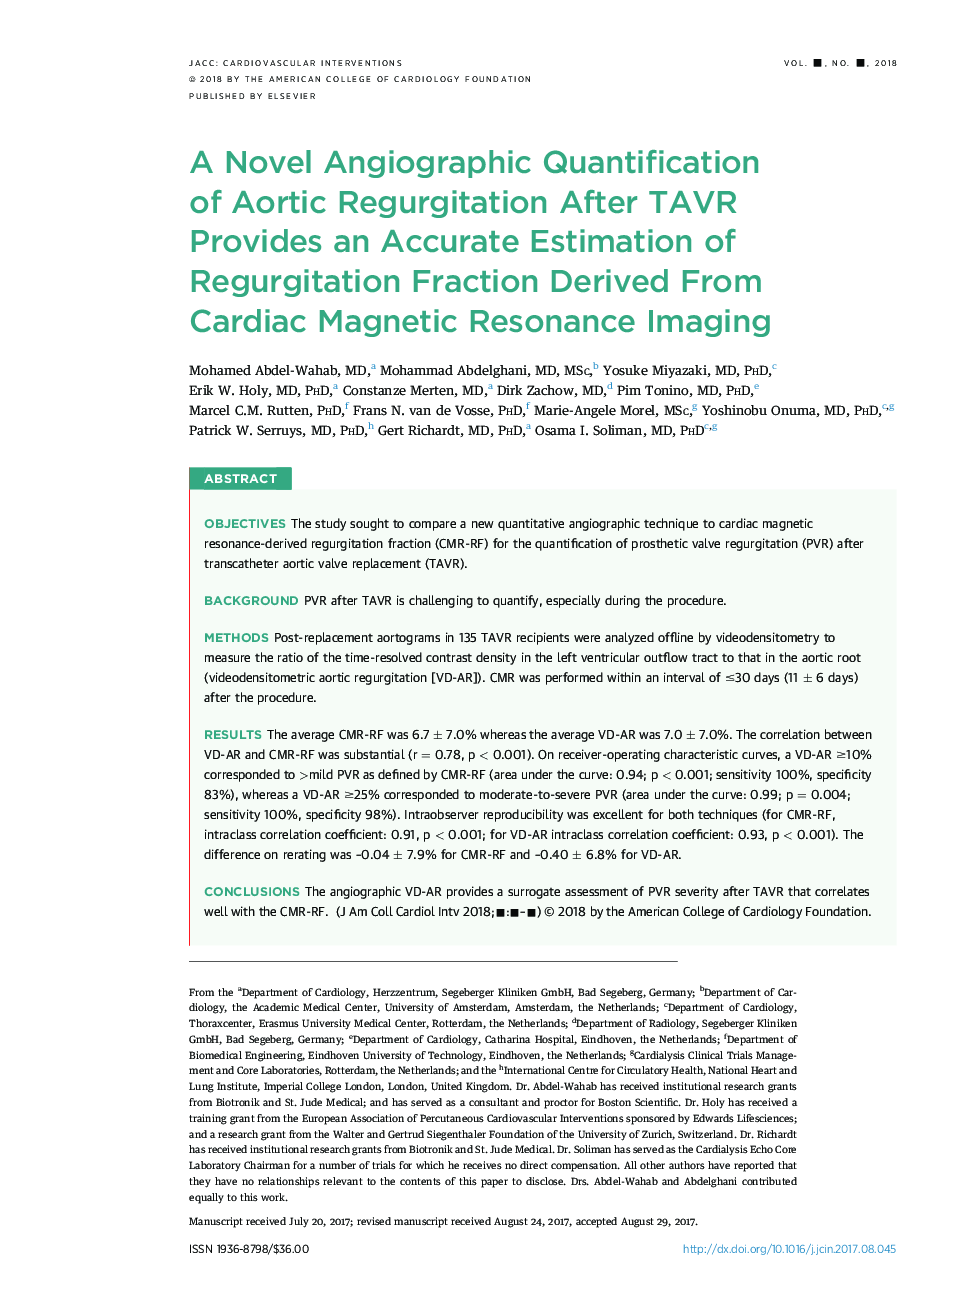 A Novel Angiographic Quantification ofÂ Aortic Regurgitation After TAVR Provides an Accurate Estimation of Regurgitation Fraction Derived From Cardiac Magnetic Resonance Imaging